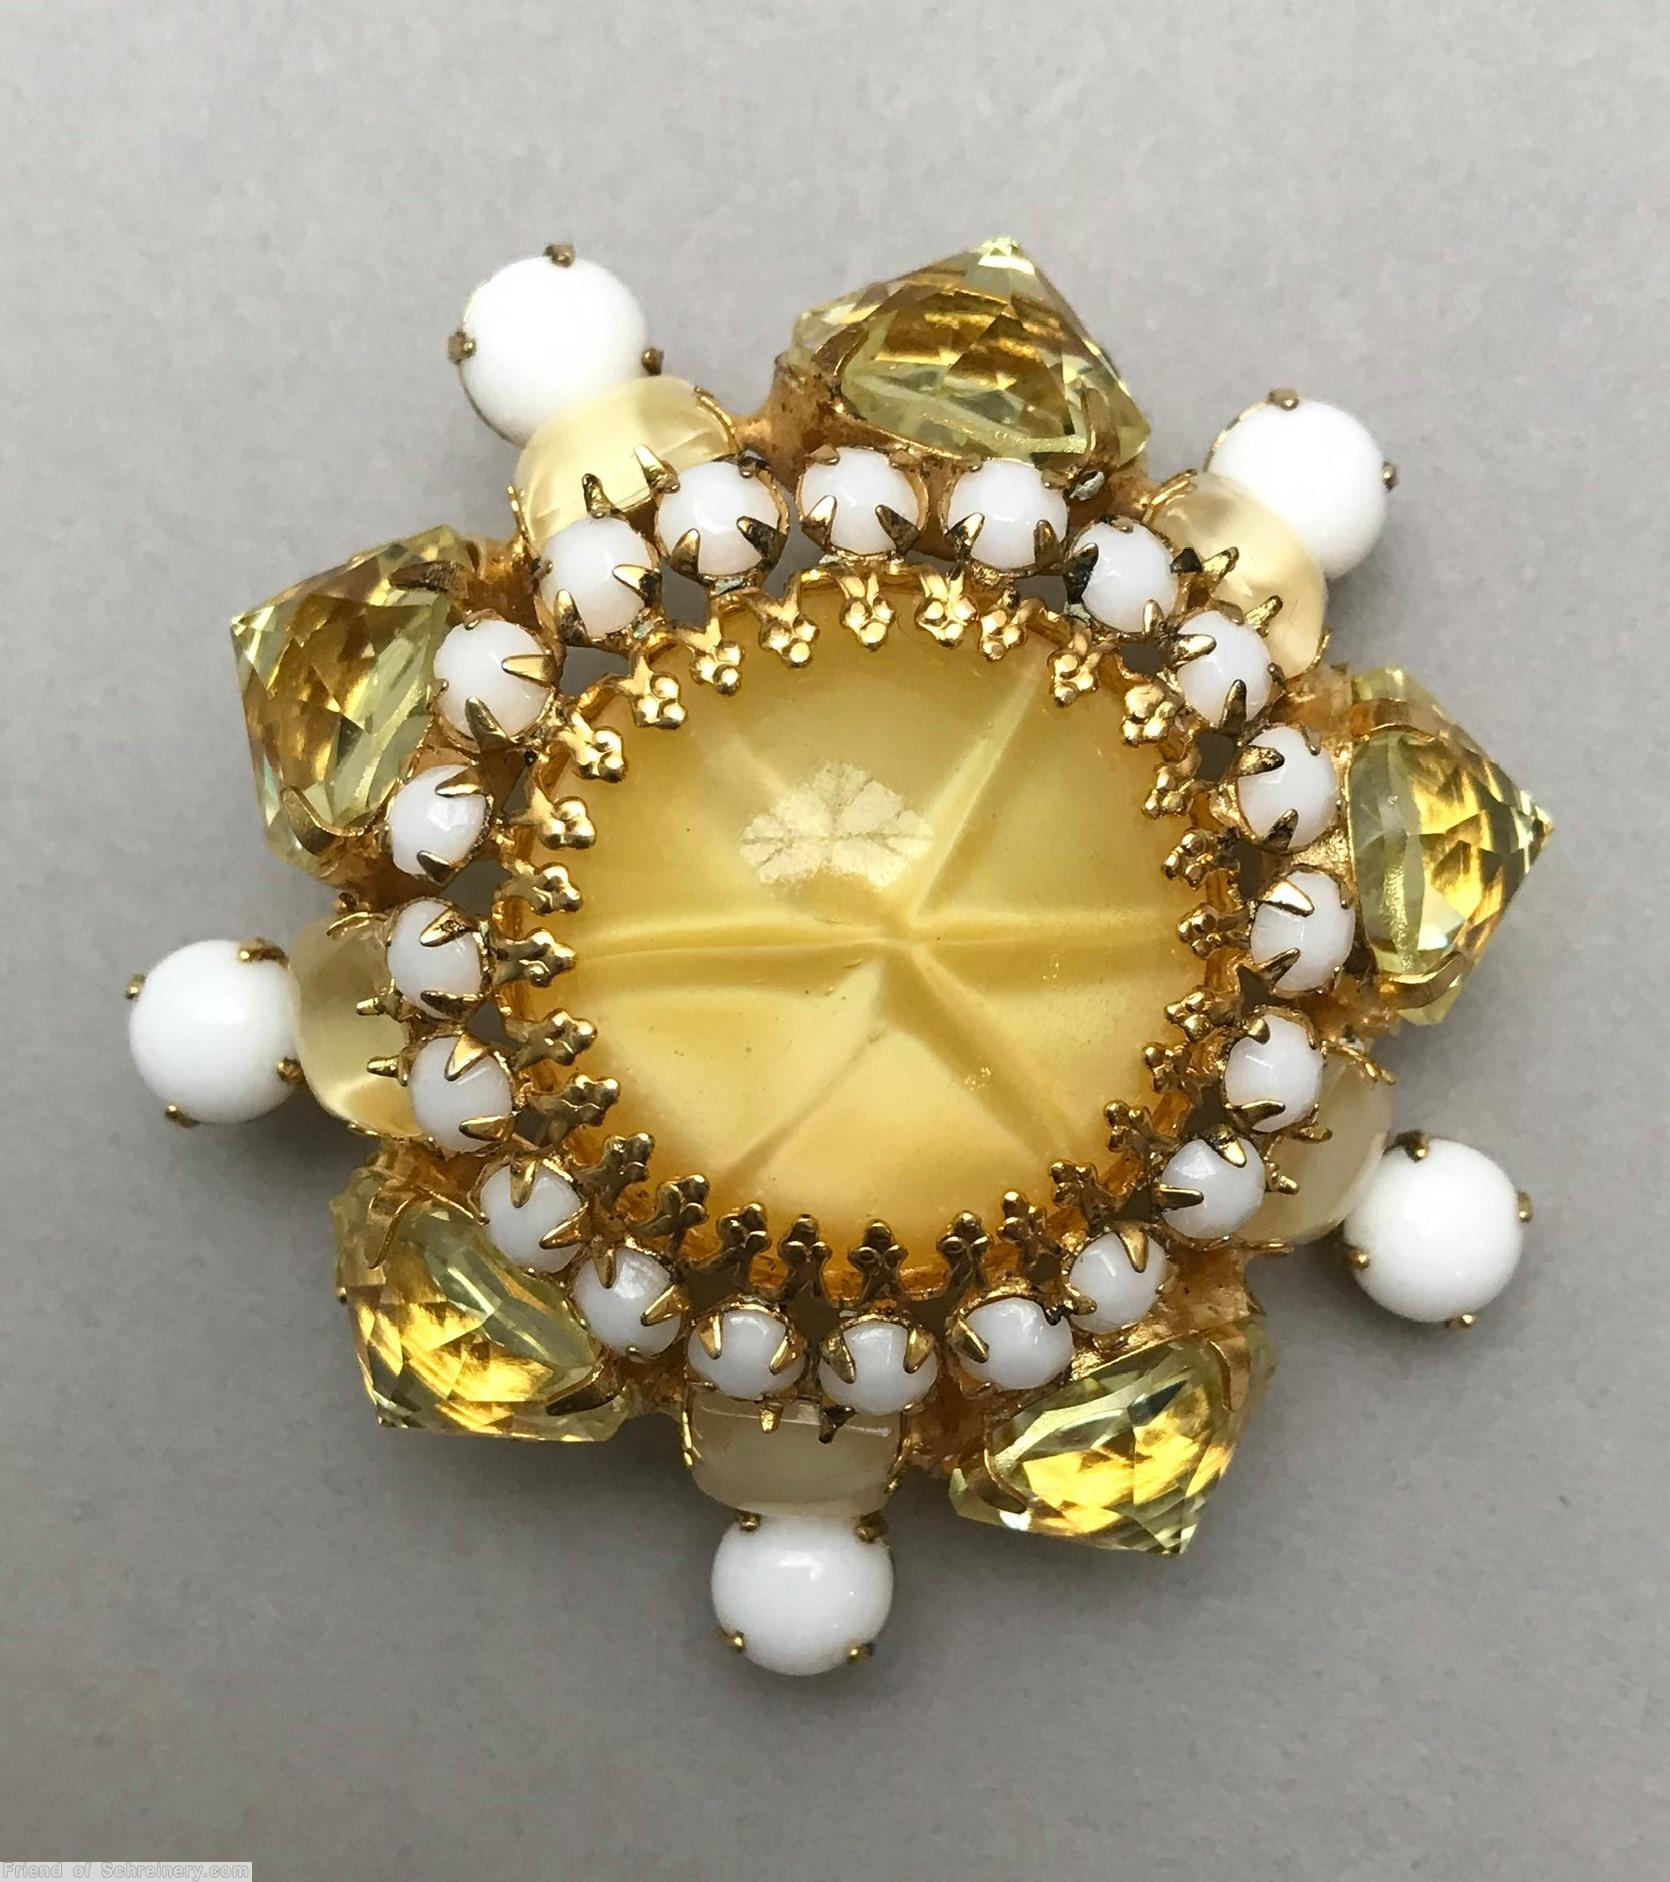 Schreiner large round open back rose cut center pentagram pin 5 corner stone moonglow honey large round art glass white clear champgne inverted goldtone jewelry